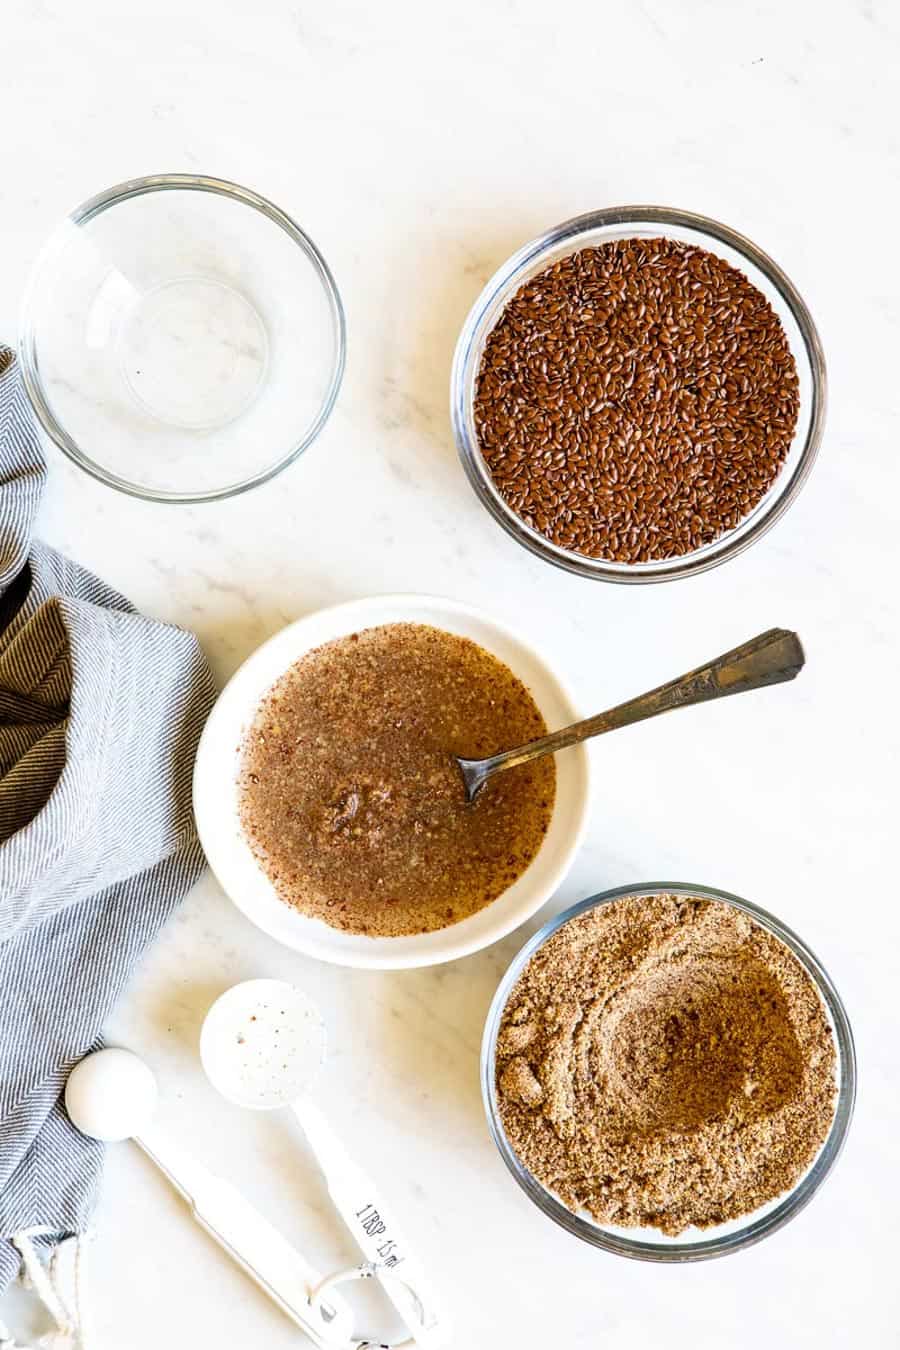 ground flax seeds in bowls with water and spoon to soak.